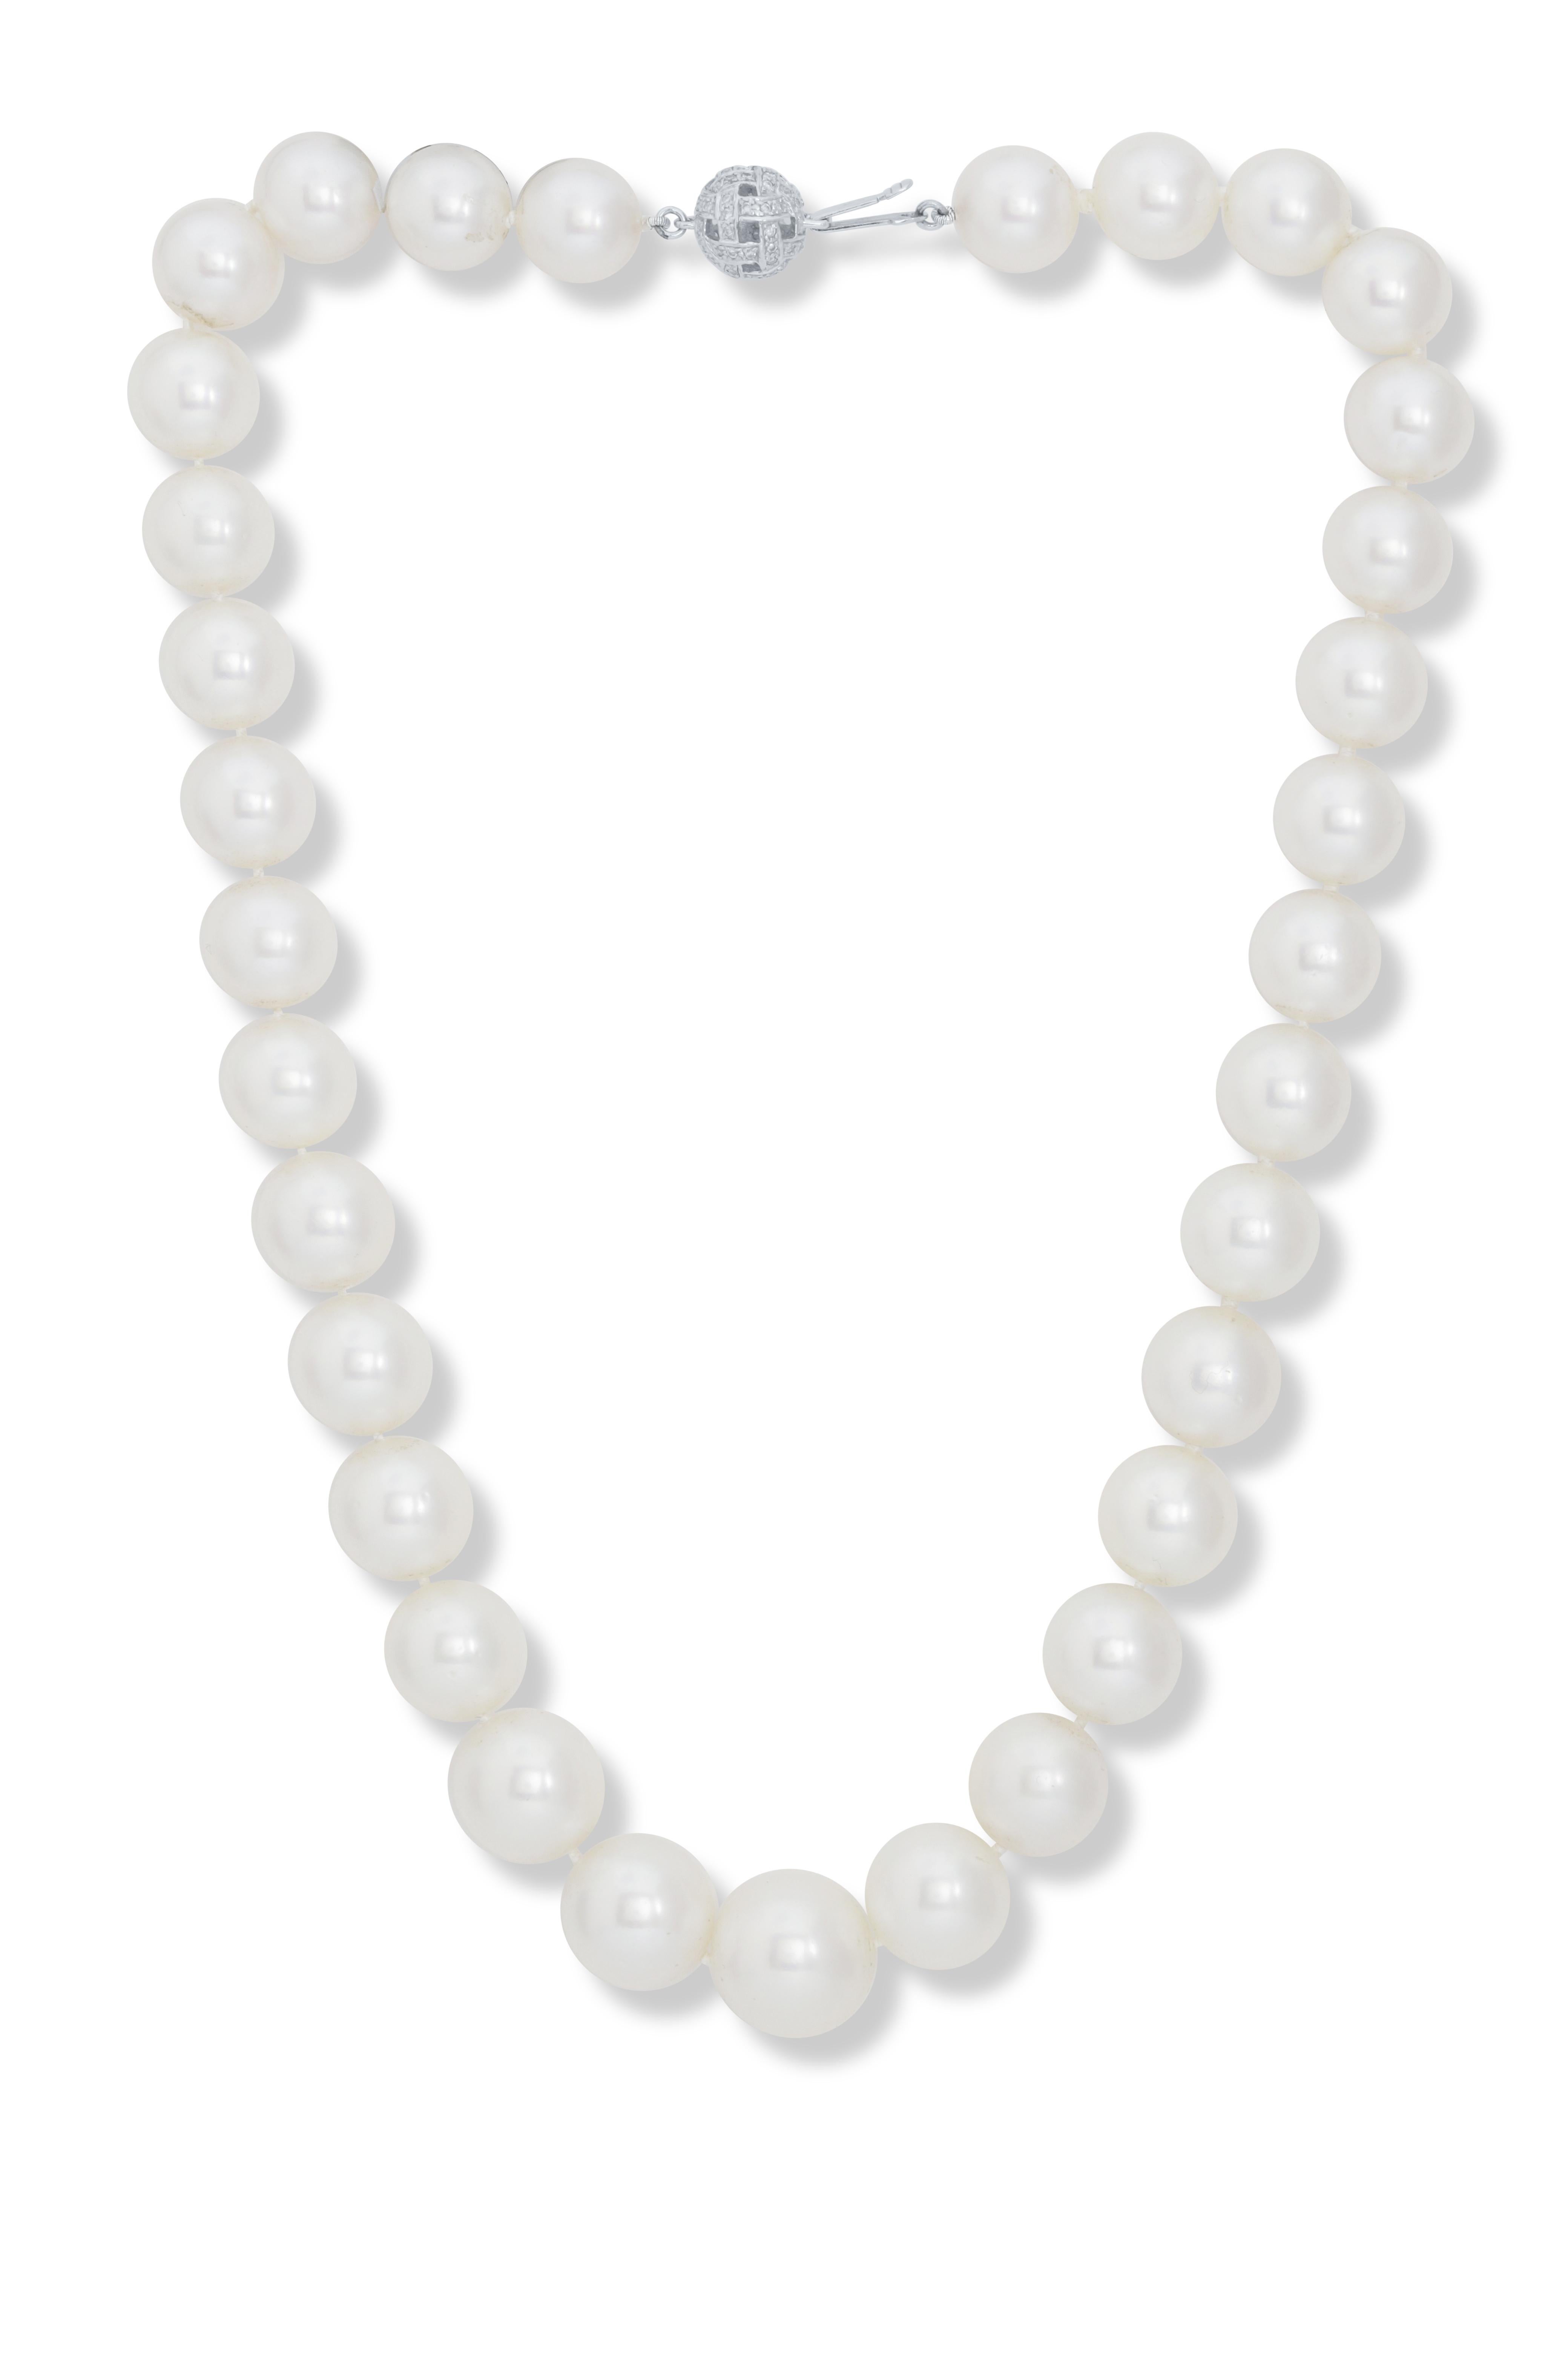 Brilliant Cut Diana M. 18 kt white gold pearl necklace adorned with 11-15 mm tahitian south se For Sale